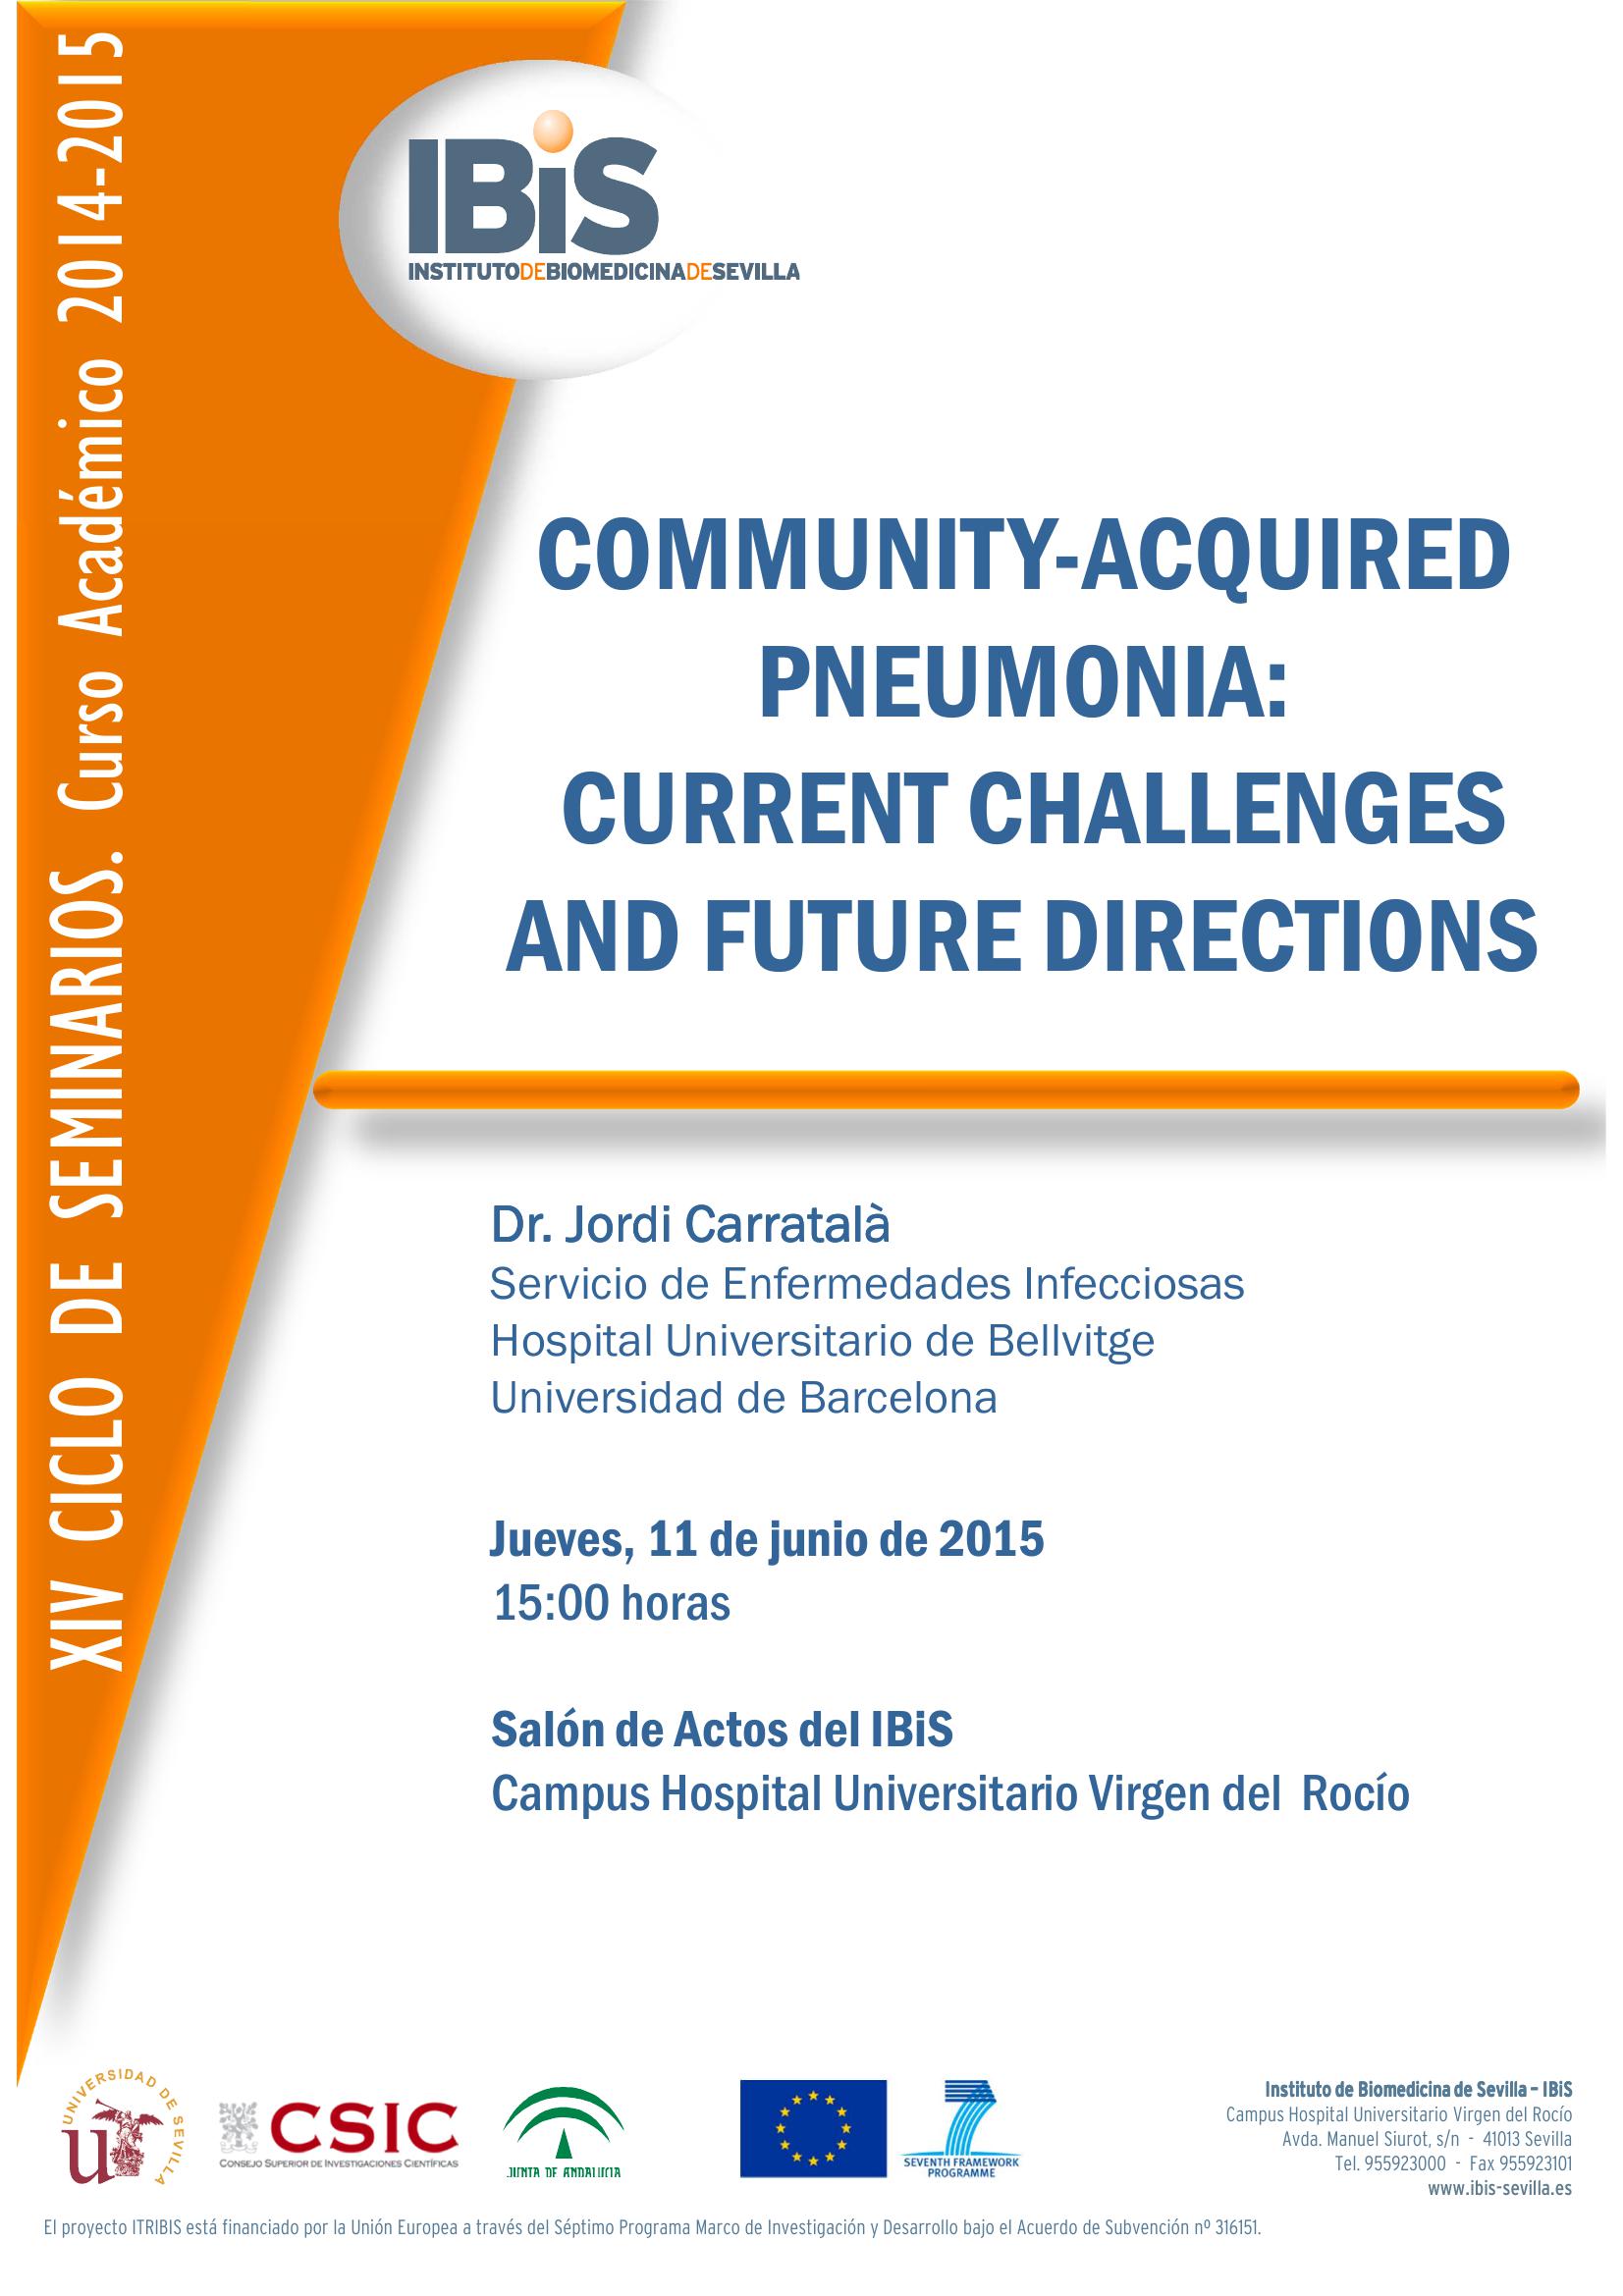 Poster: COMMUNITY-ACQUIRED PNEUMONIA: CURRENT CHALLENGES AND FUTURE DIRECTIONS